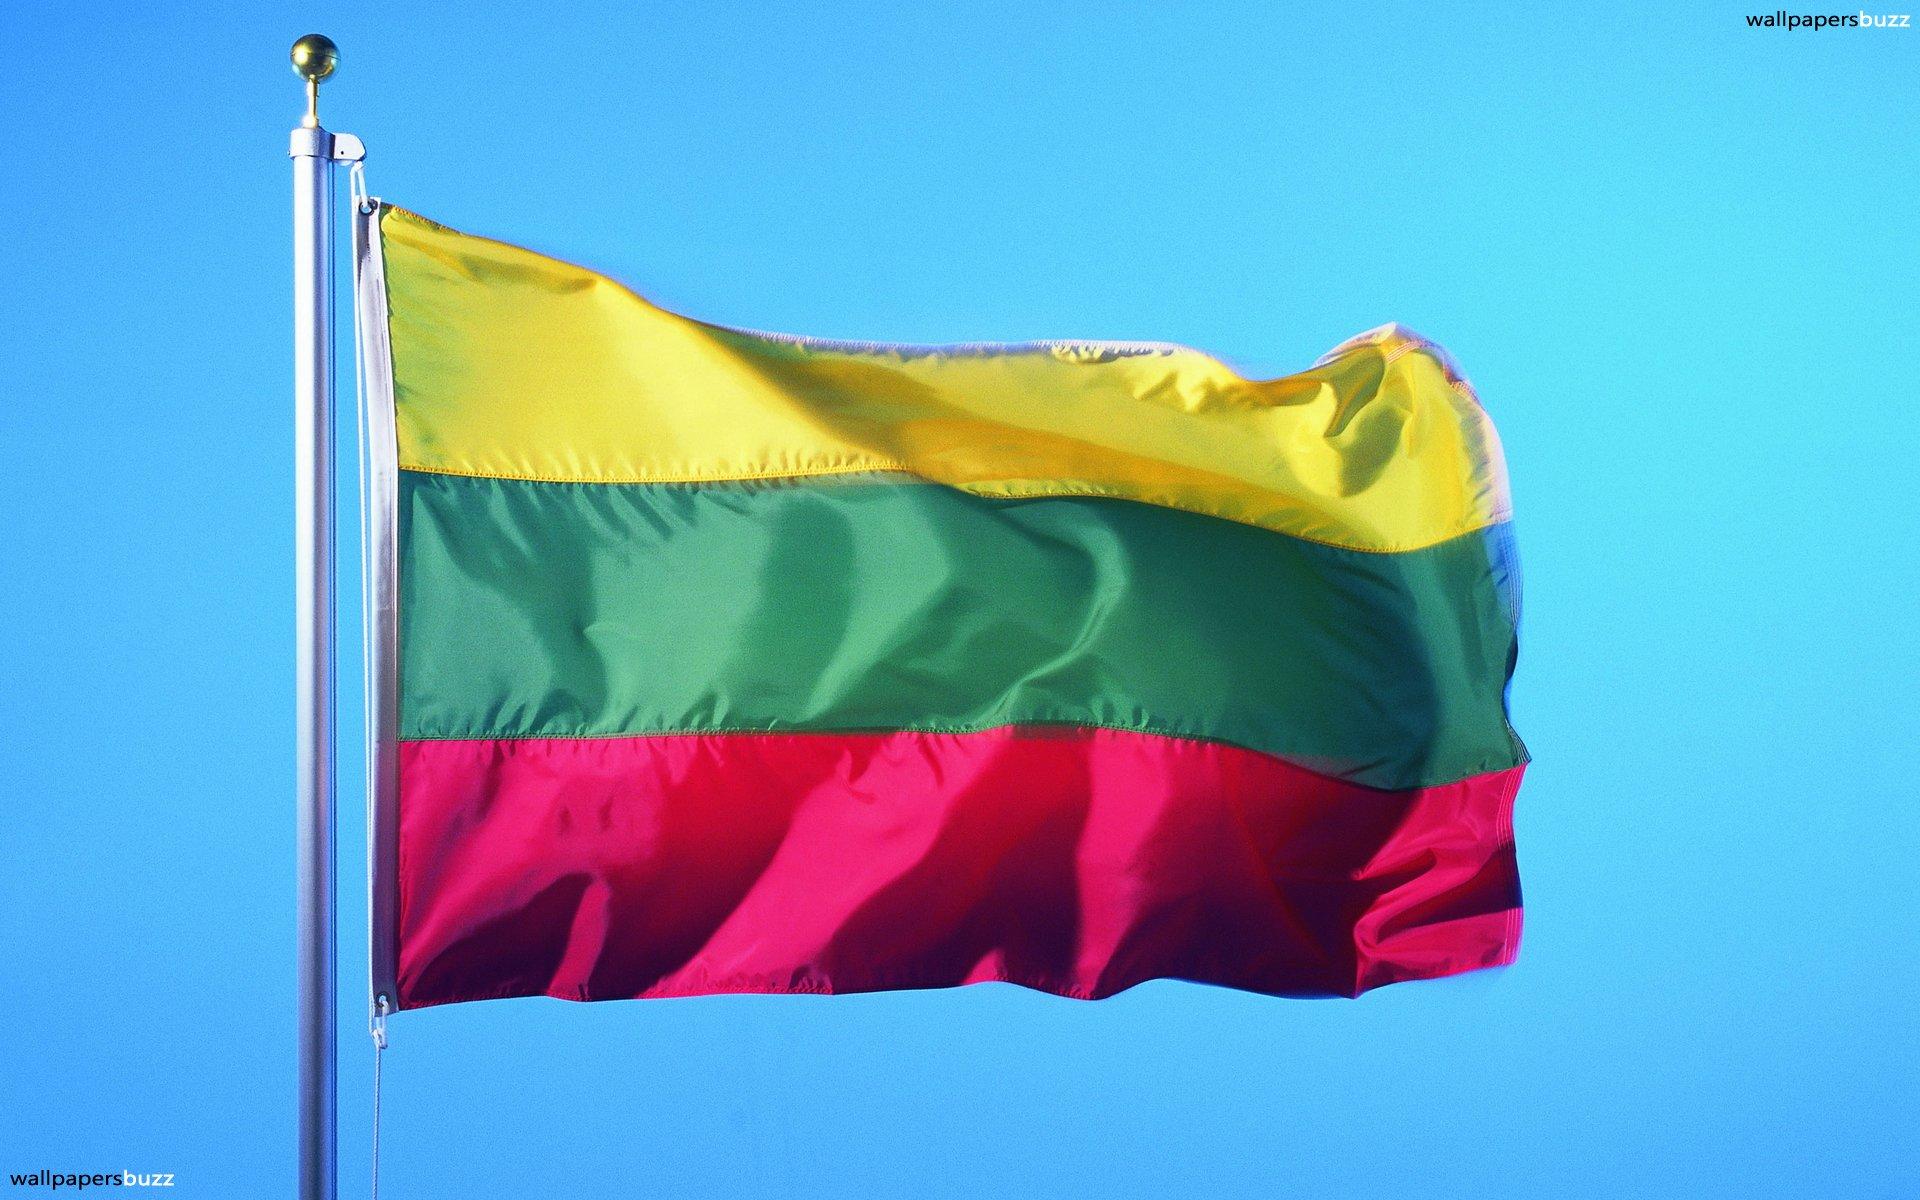 The traditional flag of Lithuania HD Wallpaper